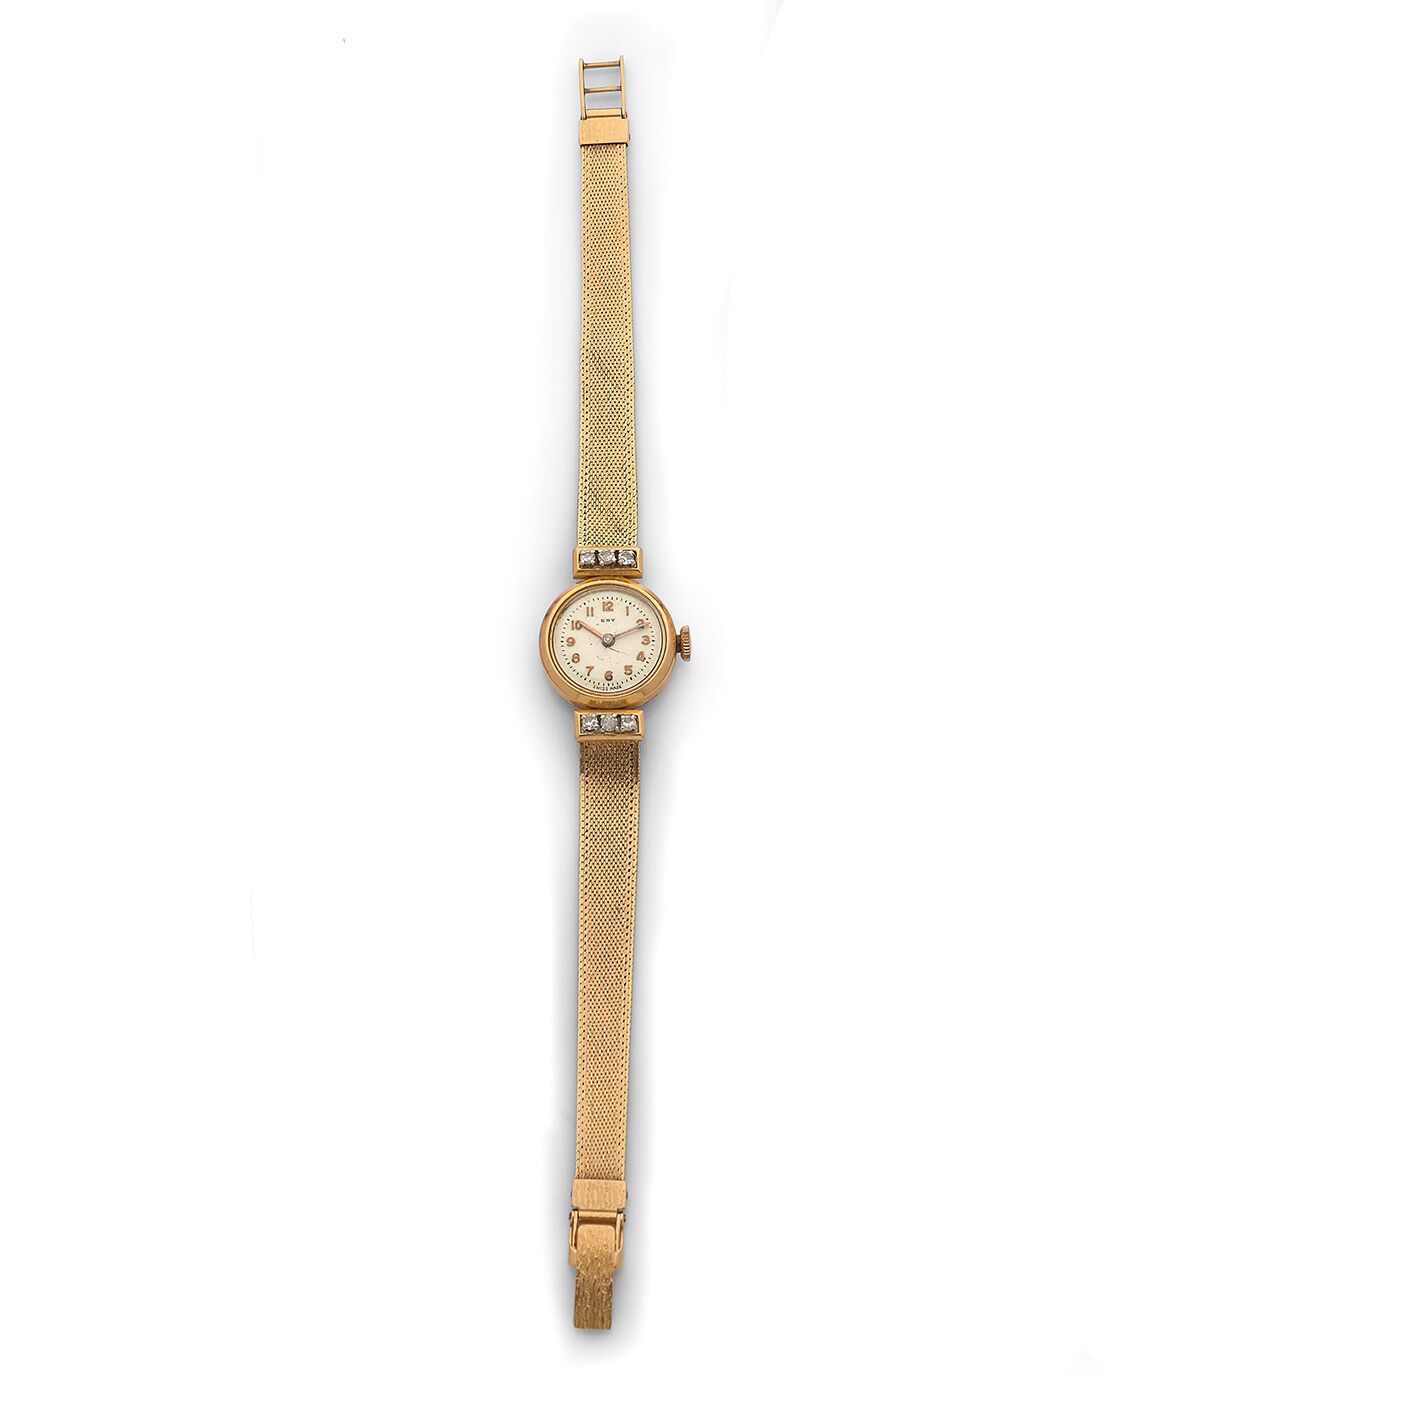 ERY ERY
Lady's watch in gold 18K (750 thousandths), circa 1950, silvered dial, A&hellip;